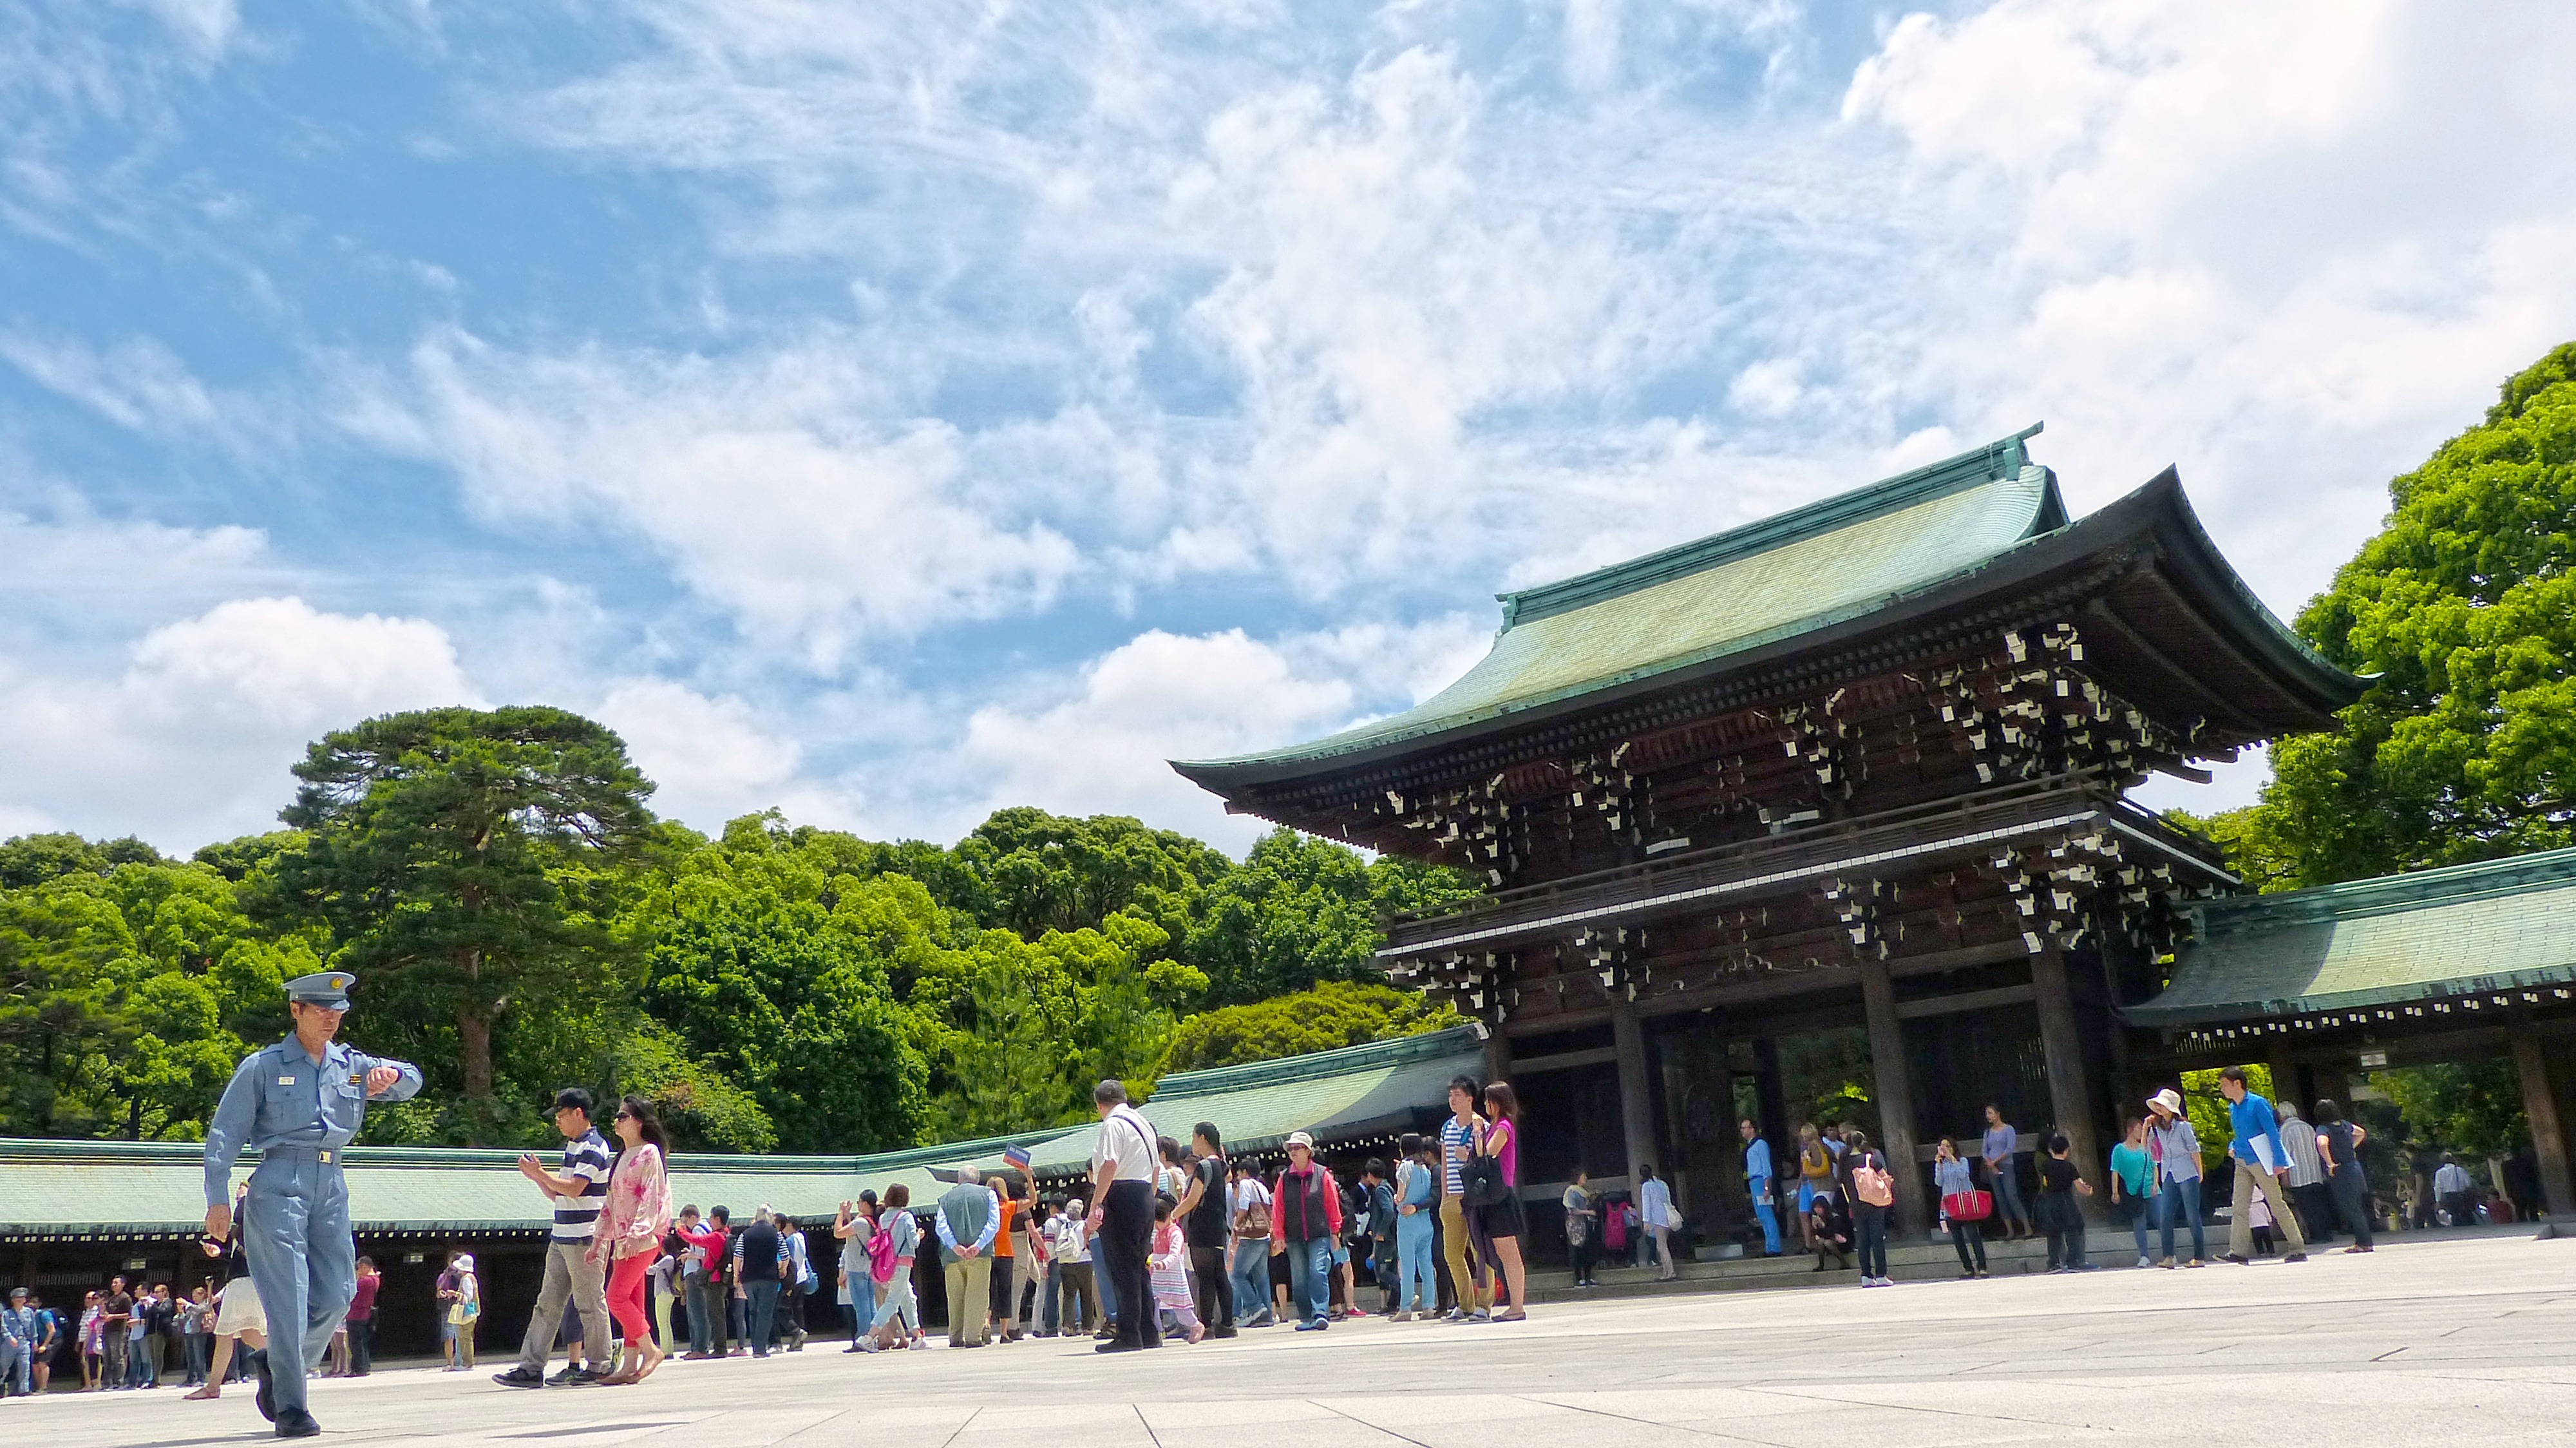 People Visiting the Shrine, Activity, Architecture, Audience, Construction, HQ Photo